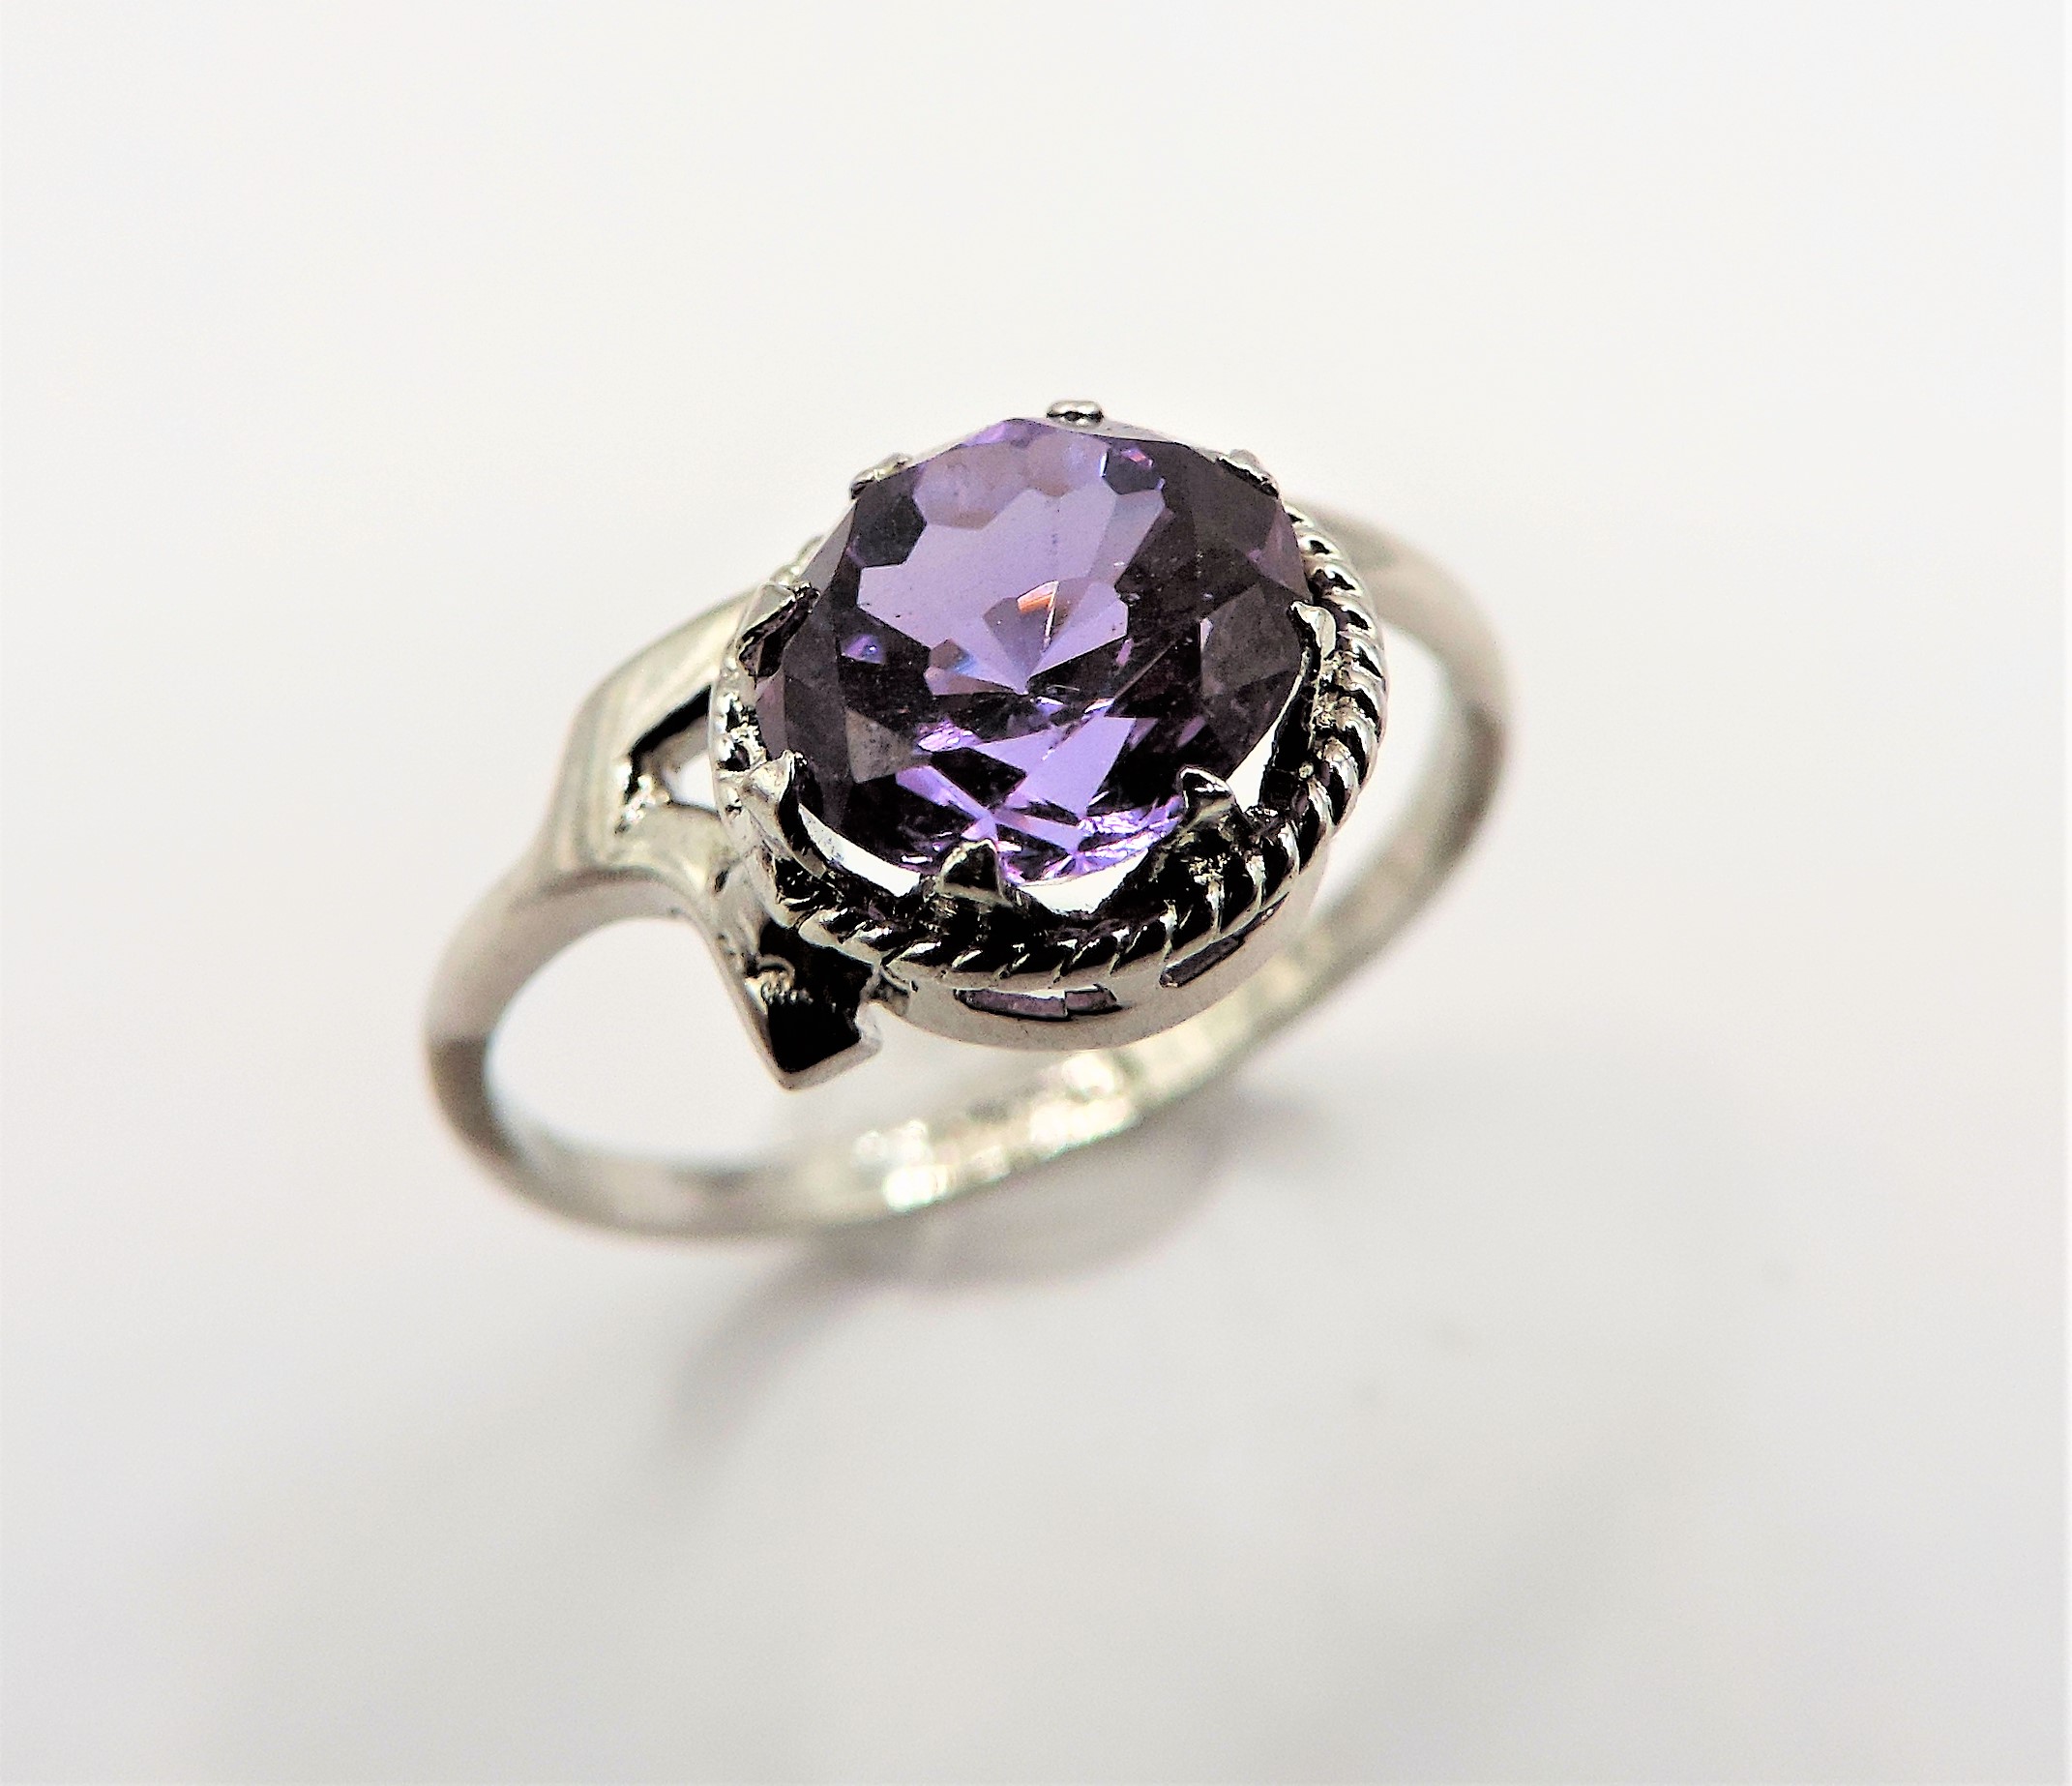 Sterling Silver 1.5ct Mystic Topaz Ring - Image 2 of 2